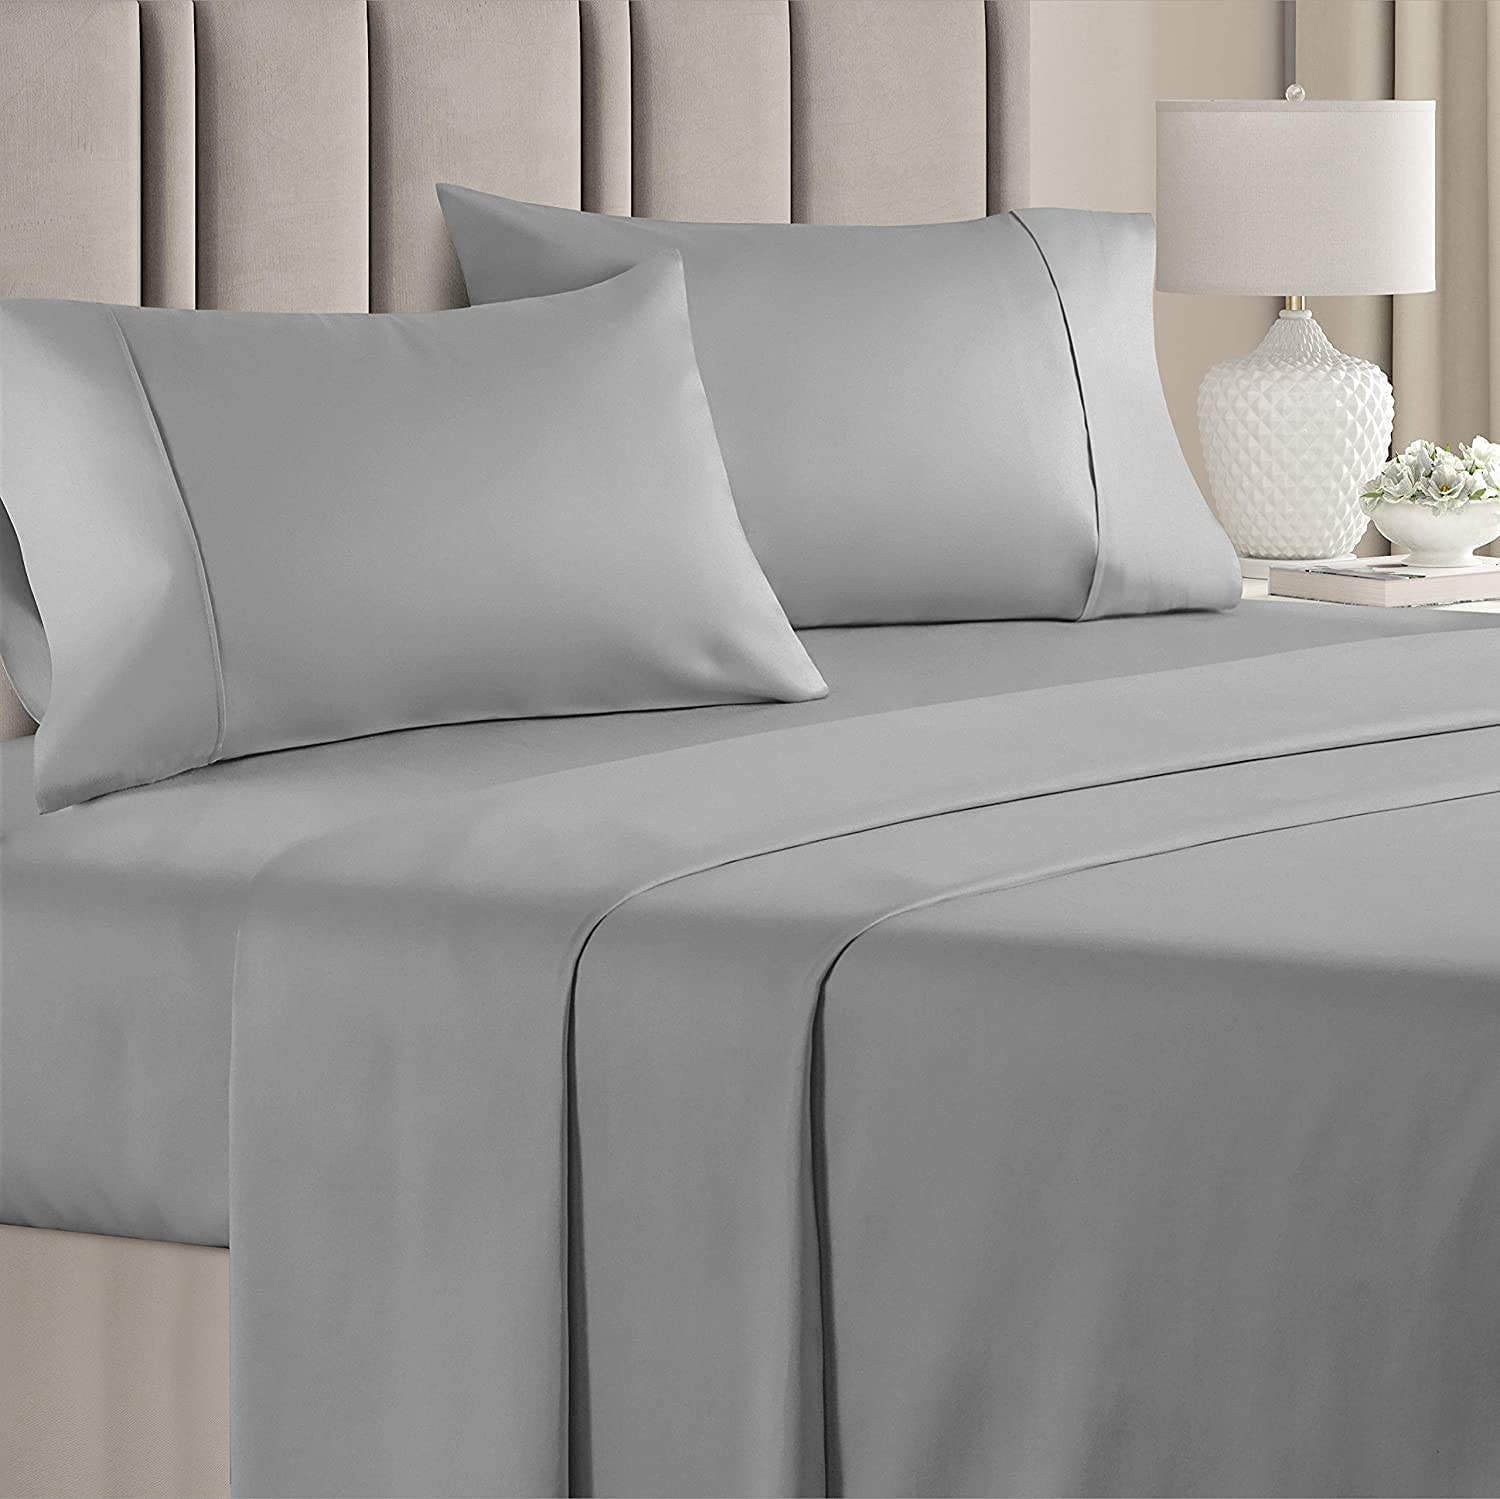 100% Pure Egyptian Cotton Full Silver Sheet Set – 400 Thread Count- 4 Piece- Sateen Weave- Long Staple Combed Cotton-Extra Soft Smooth Silky- Sateen Weave (Full ,Silver)